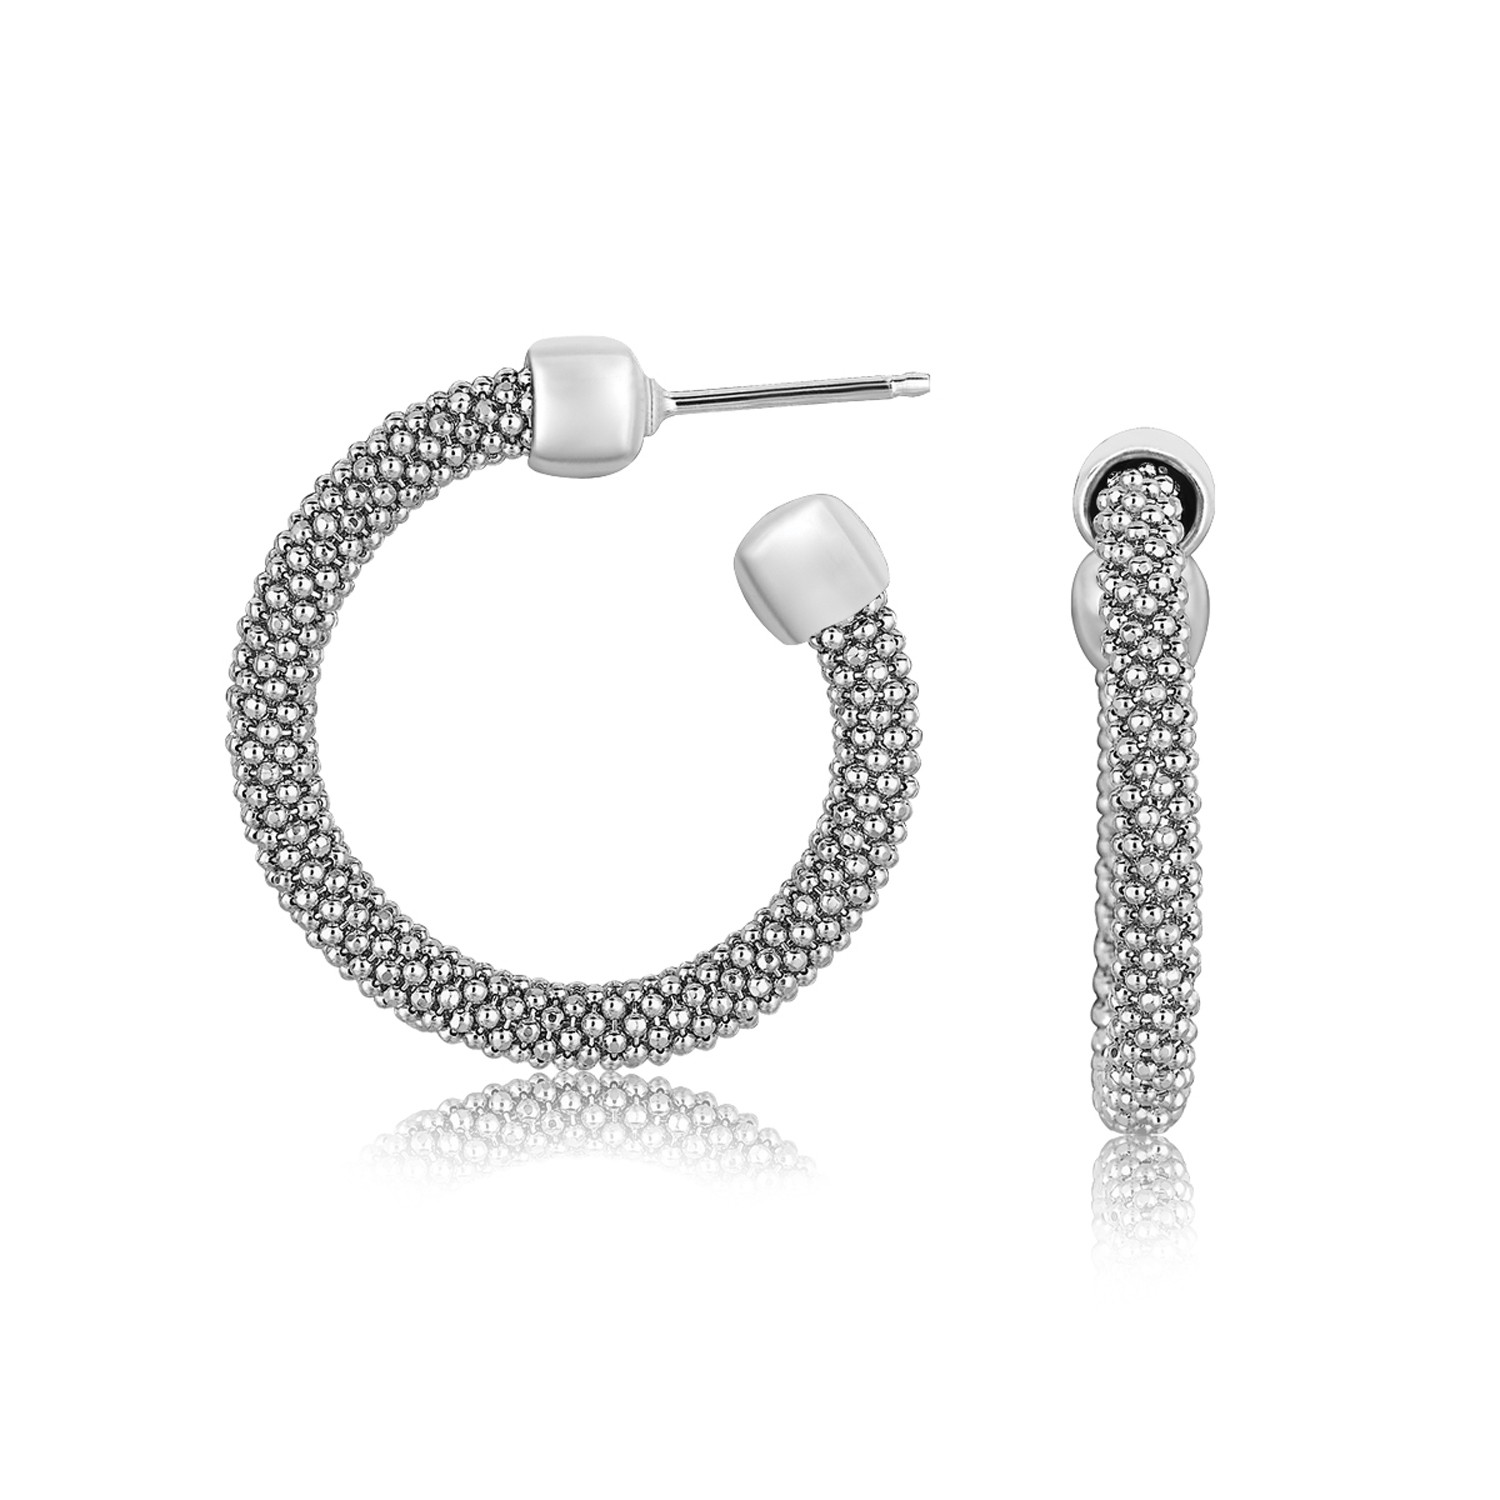 Popcorn Style Hoop Earrings with Polished Ends in Rhodium Plated ...